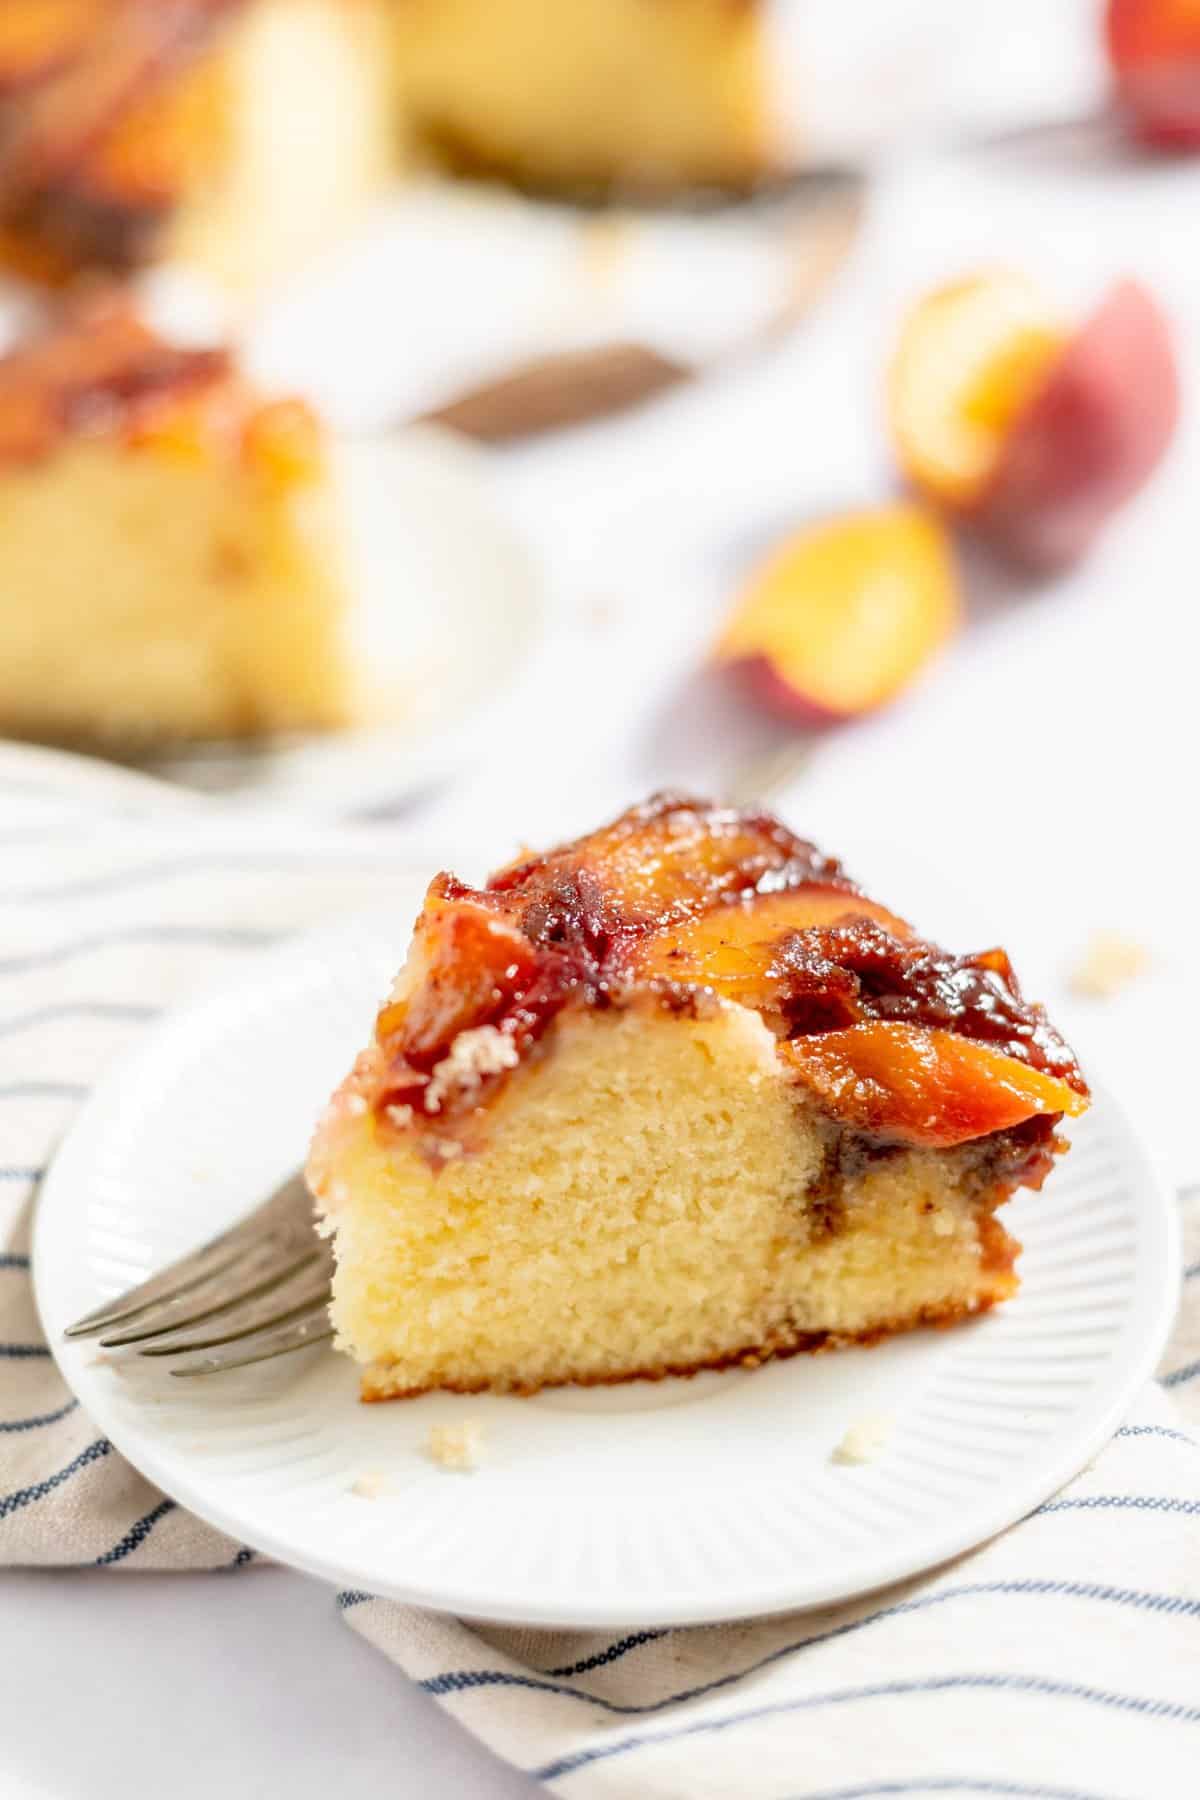 slice of cake on white plate with peaches blurred in background.